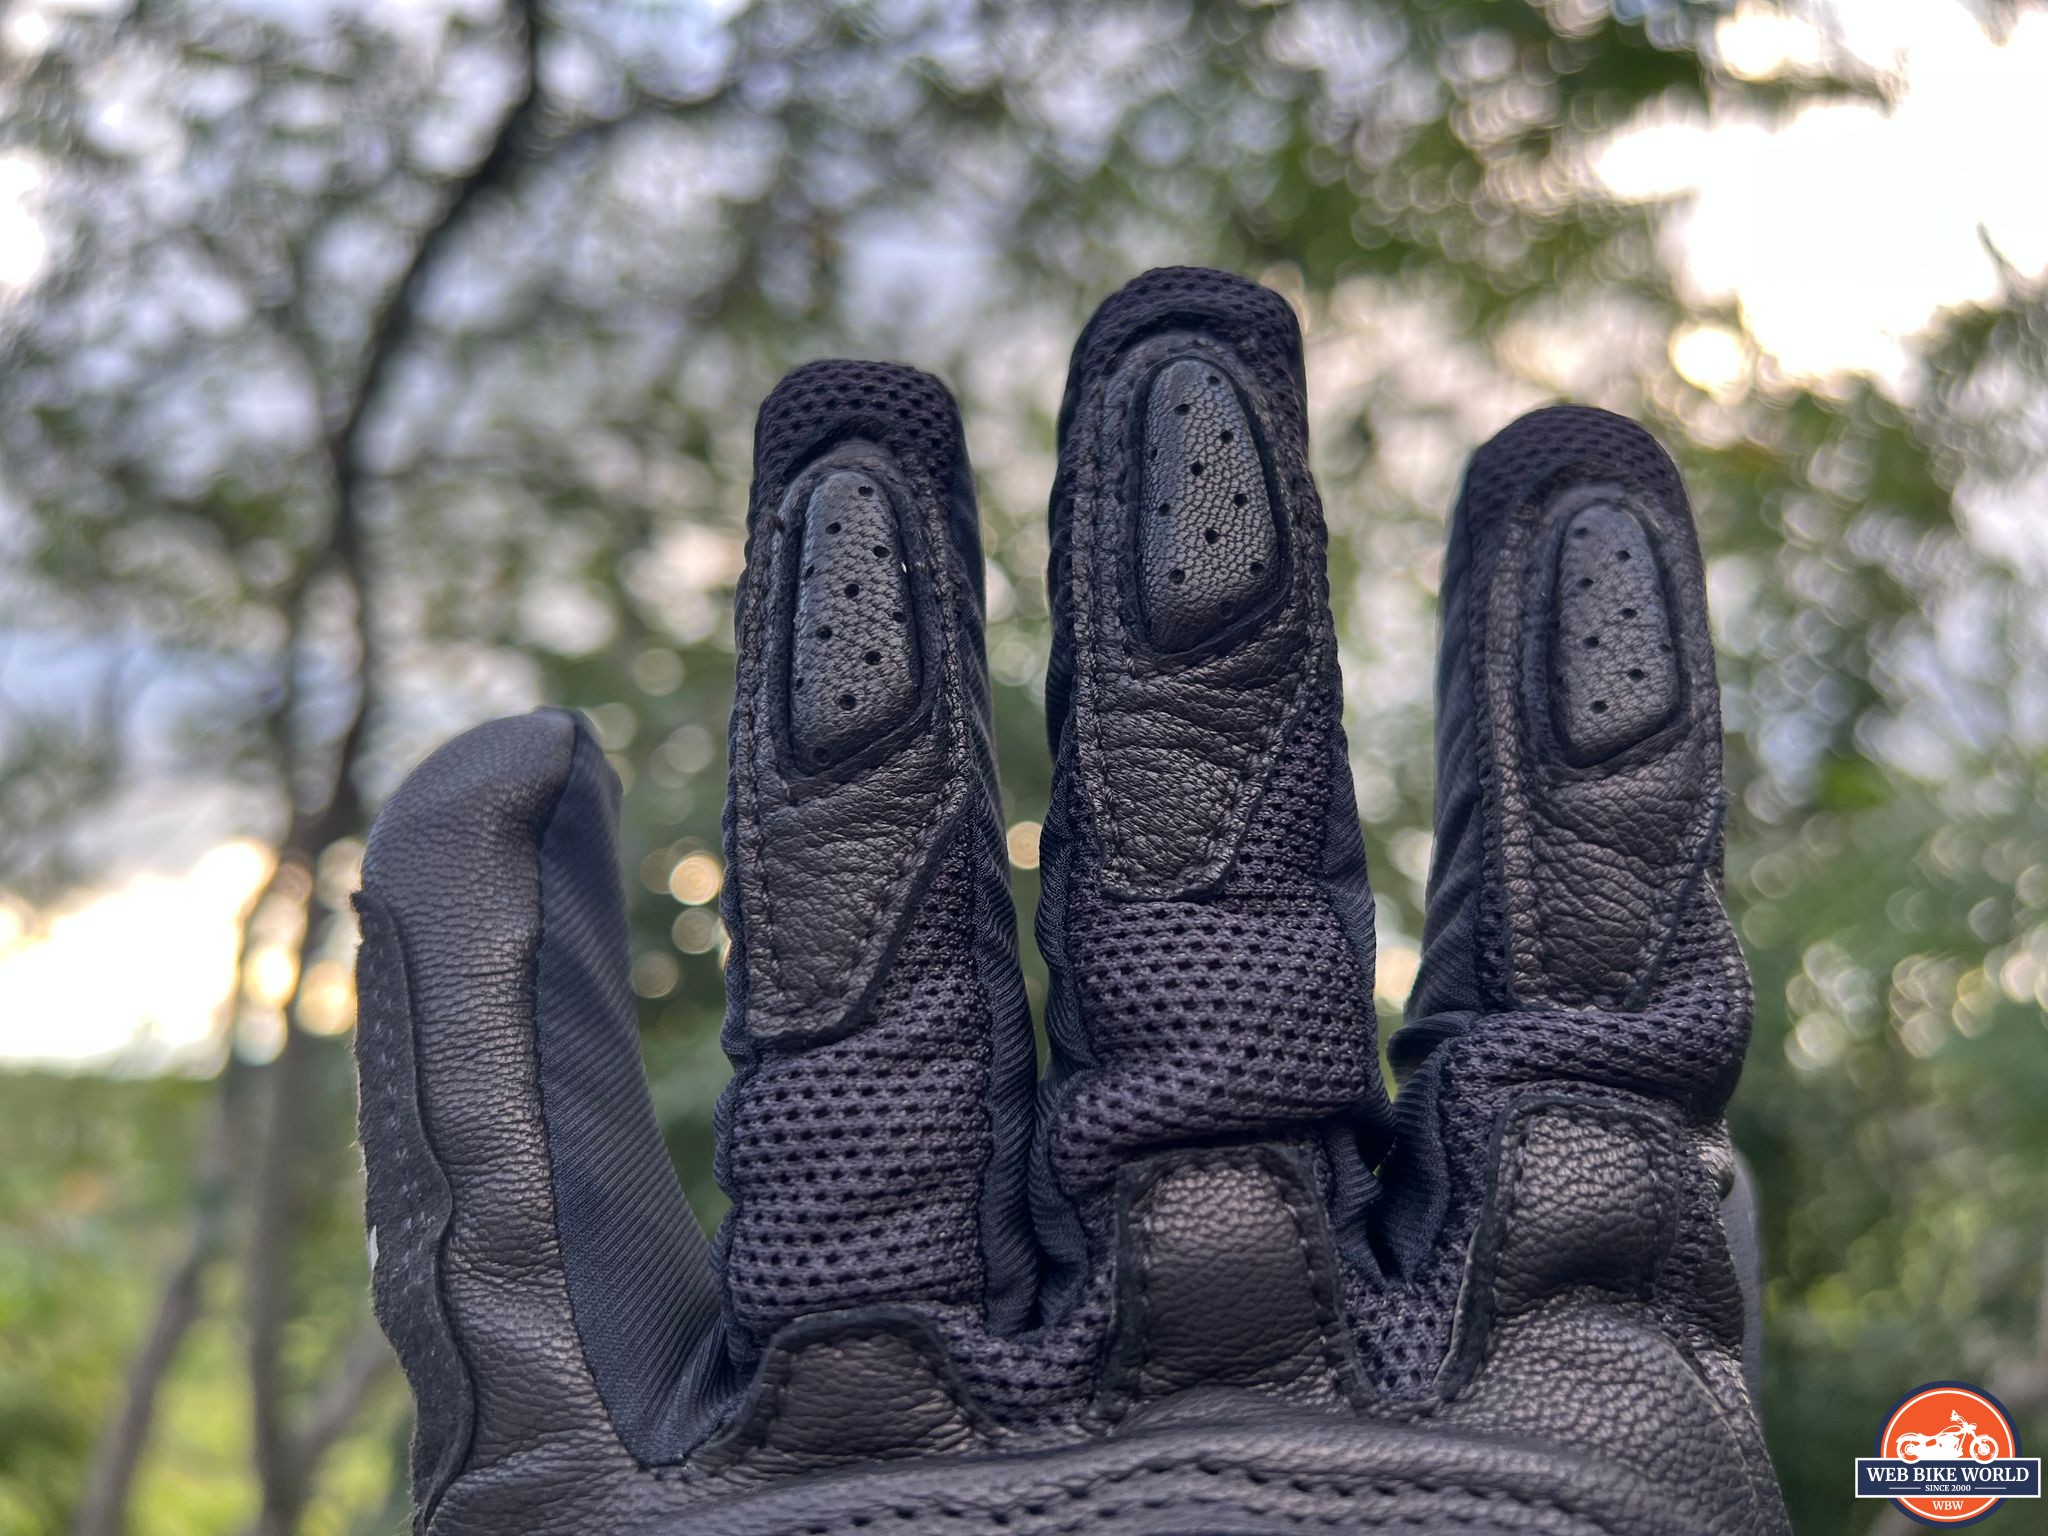 Fingers of the Spidi Nkd H2Out Gloves